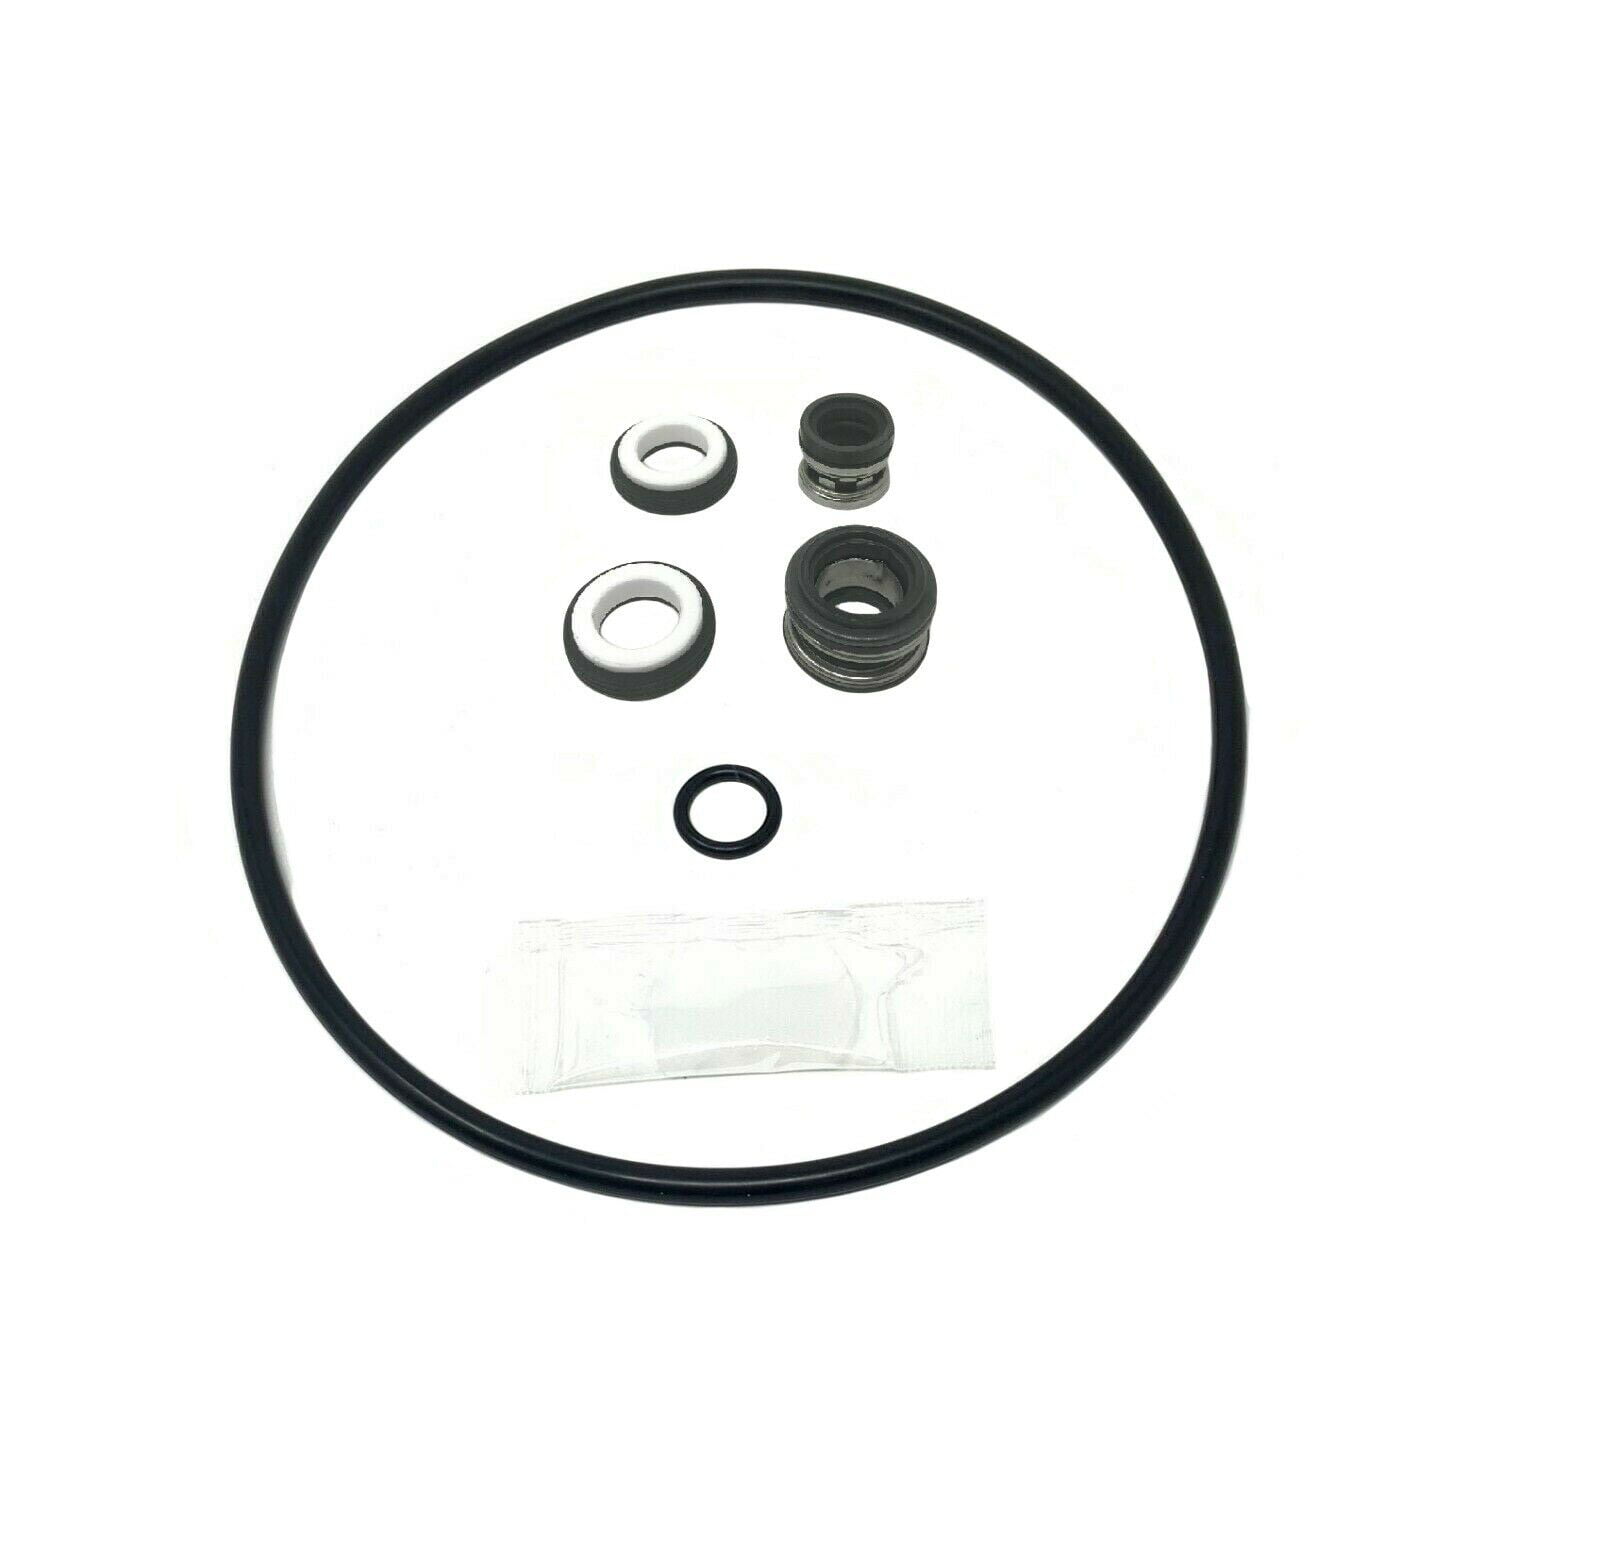 O-Ring Replacement Seal Kit Pre 2012 For Polaris Booster Pump PB4-60 3/4 hp